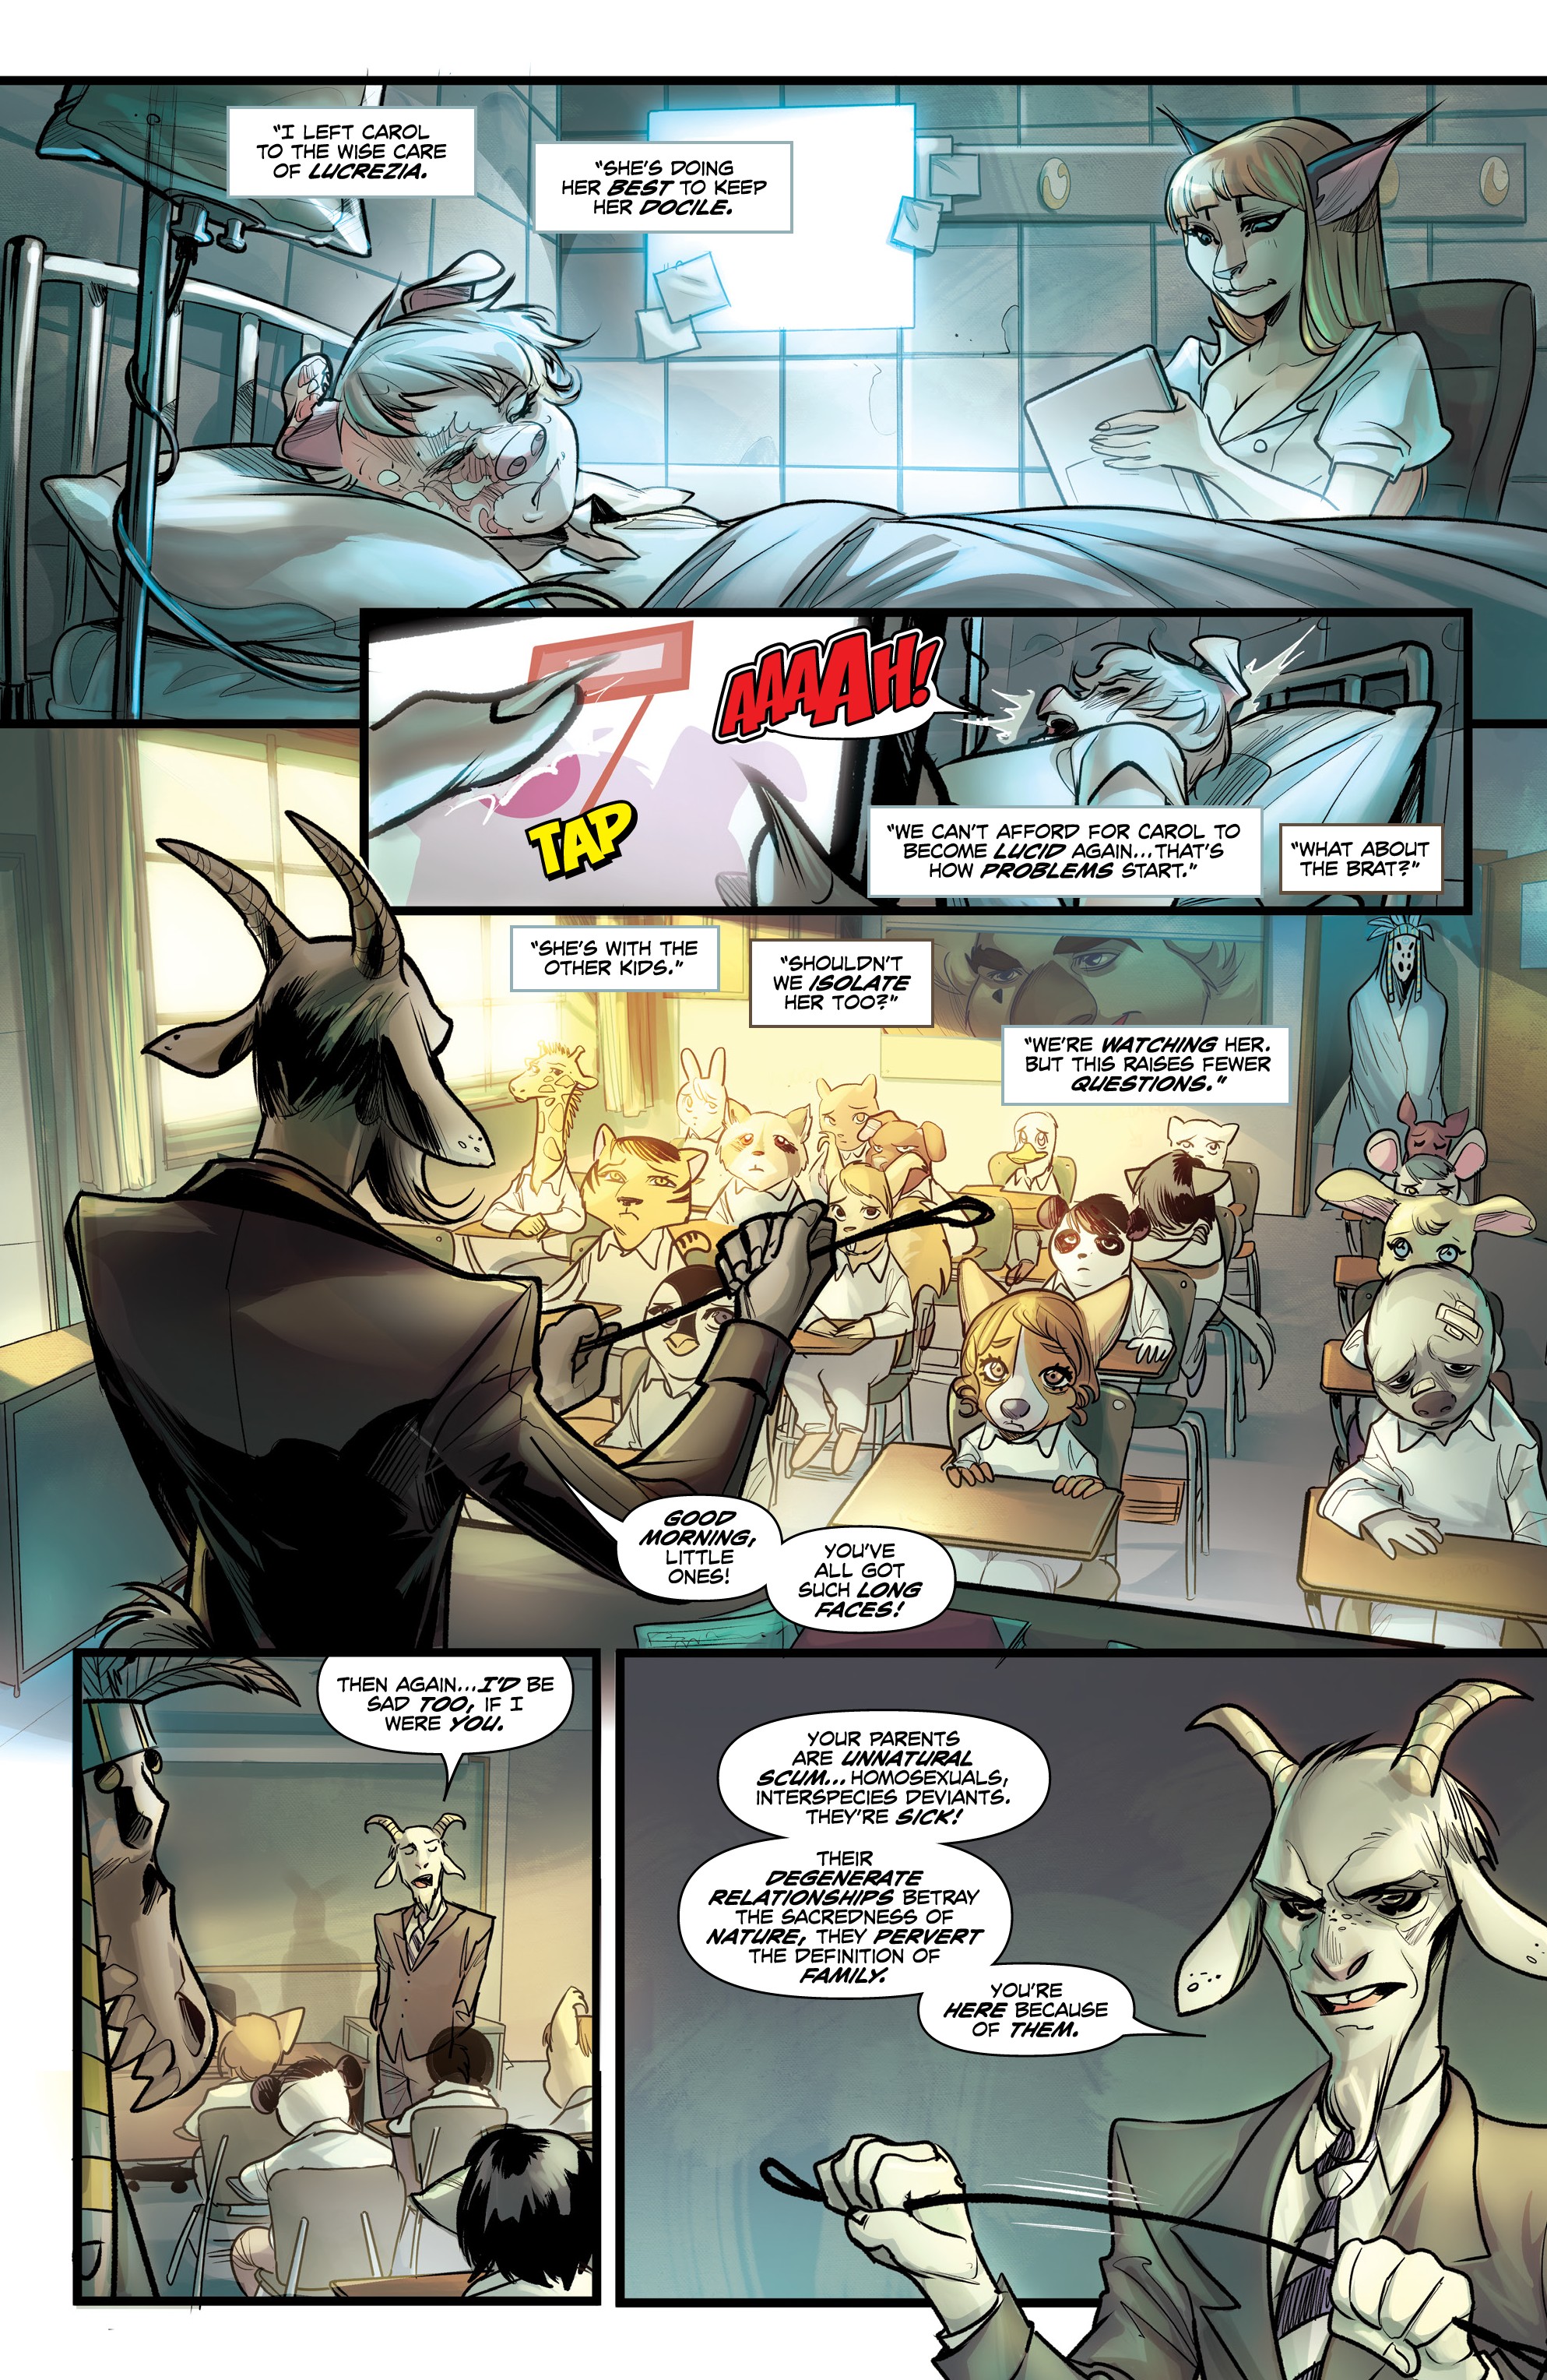 Read online Unnatural comic -  Issue #9 - 12